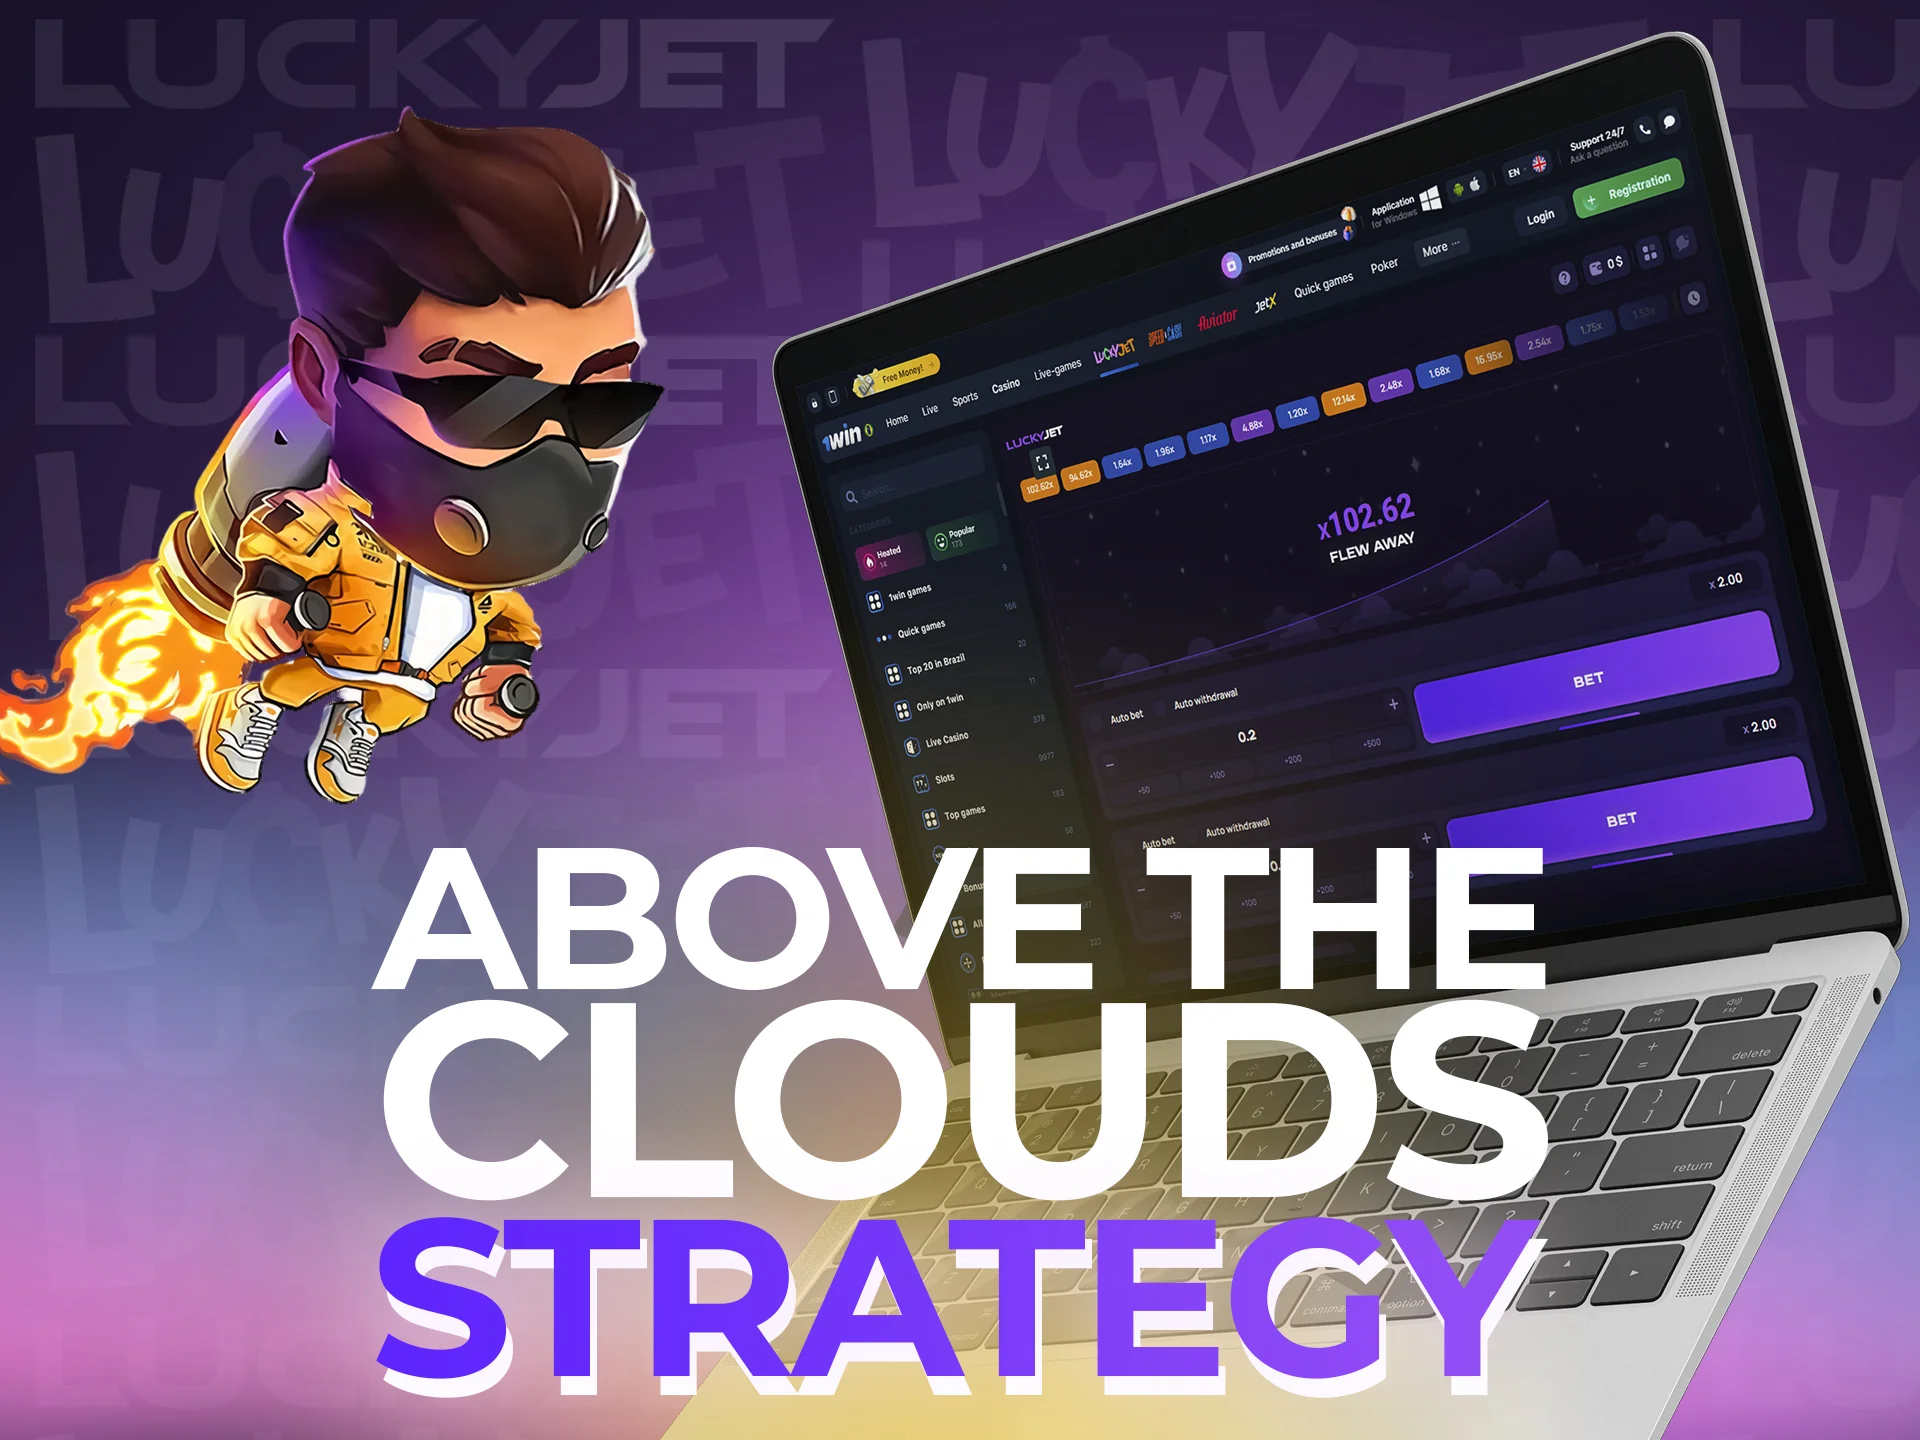 Try the above clouds strategy to win.